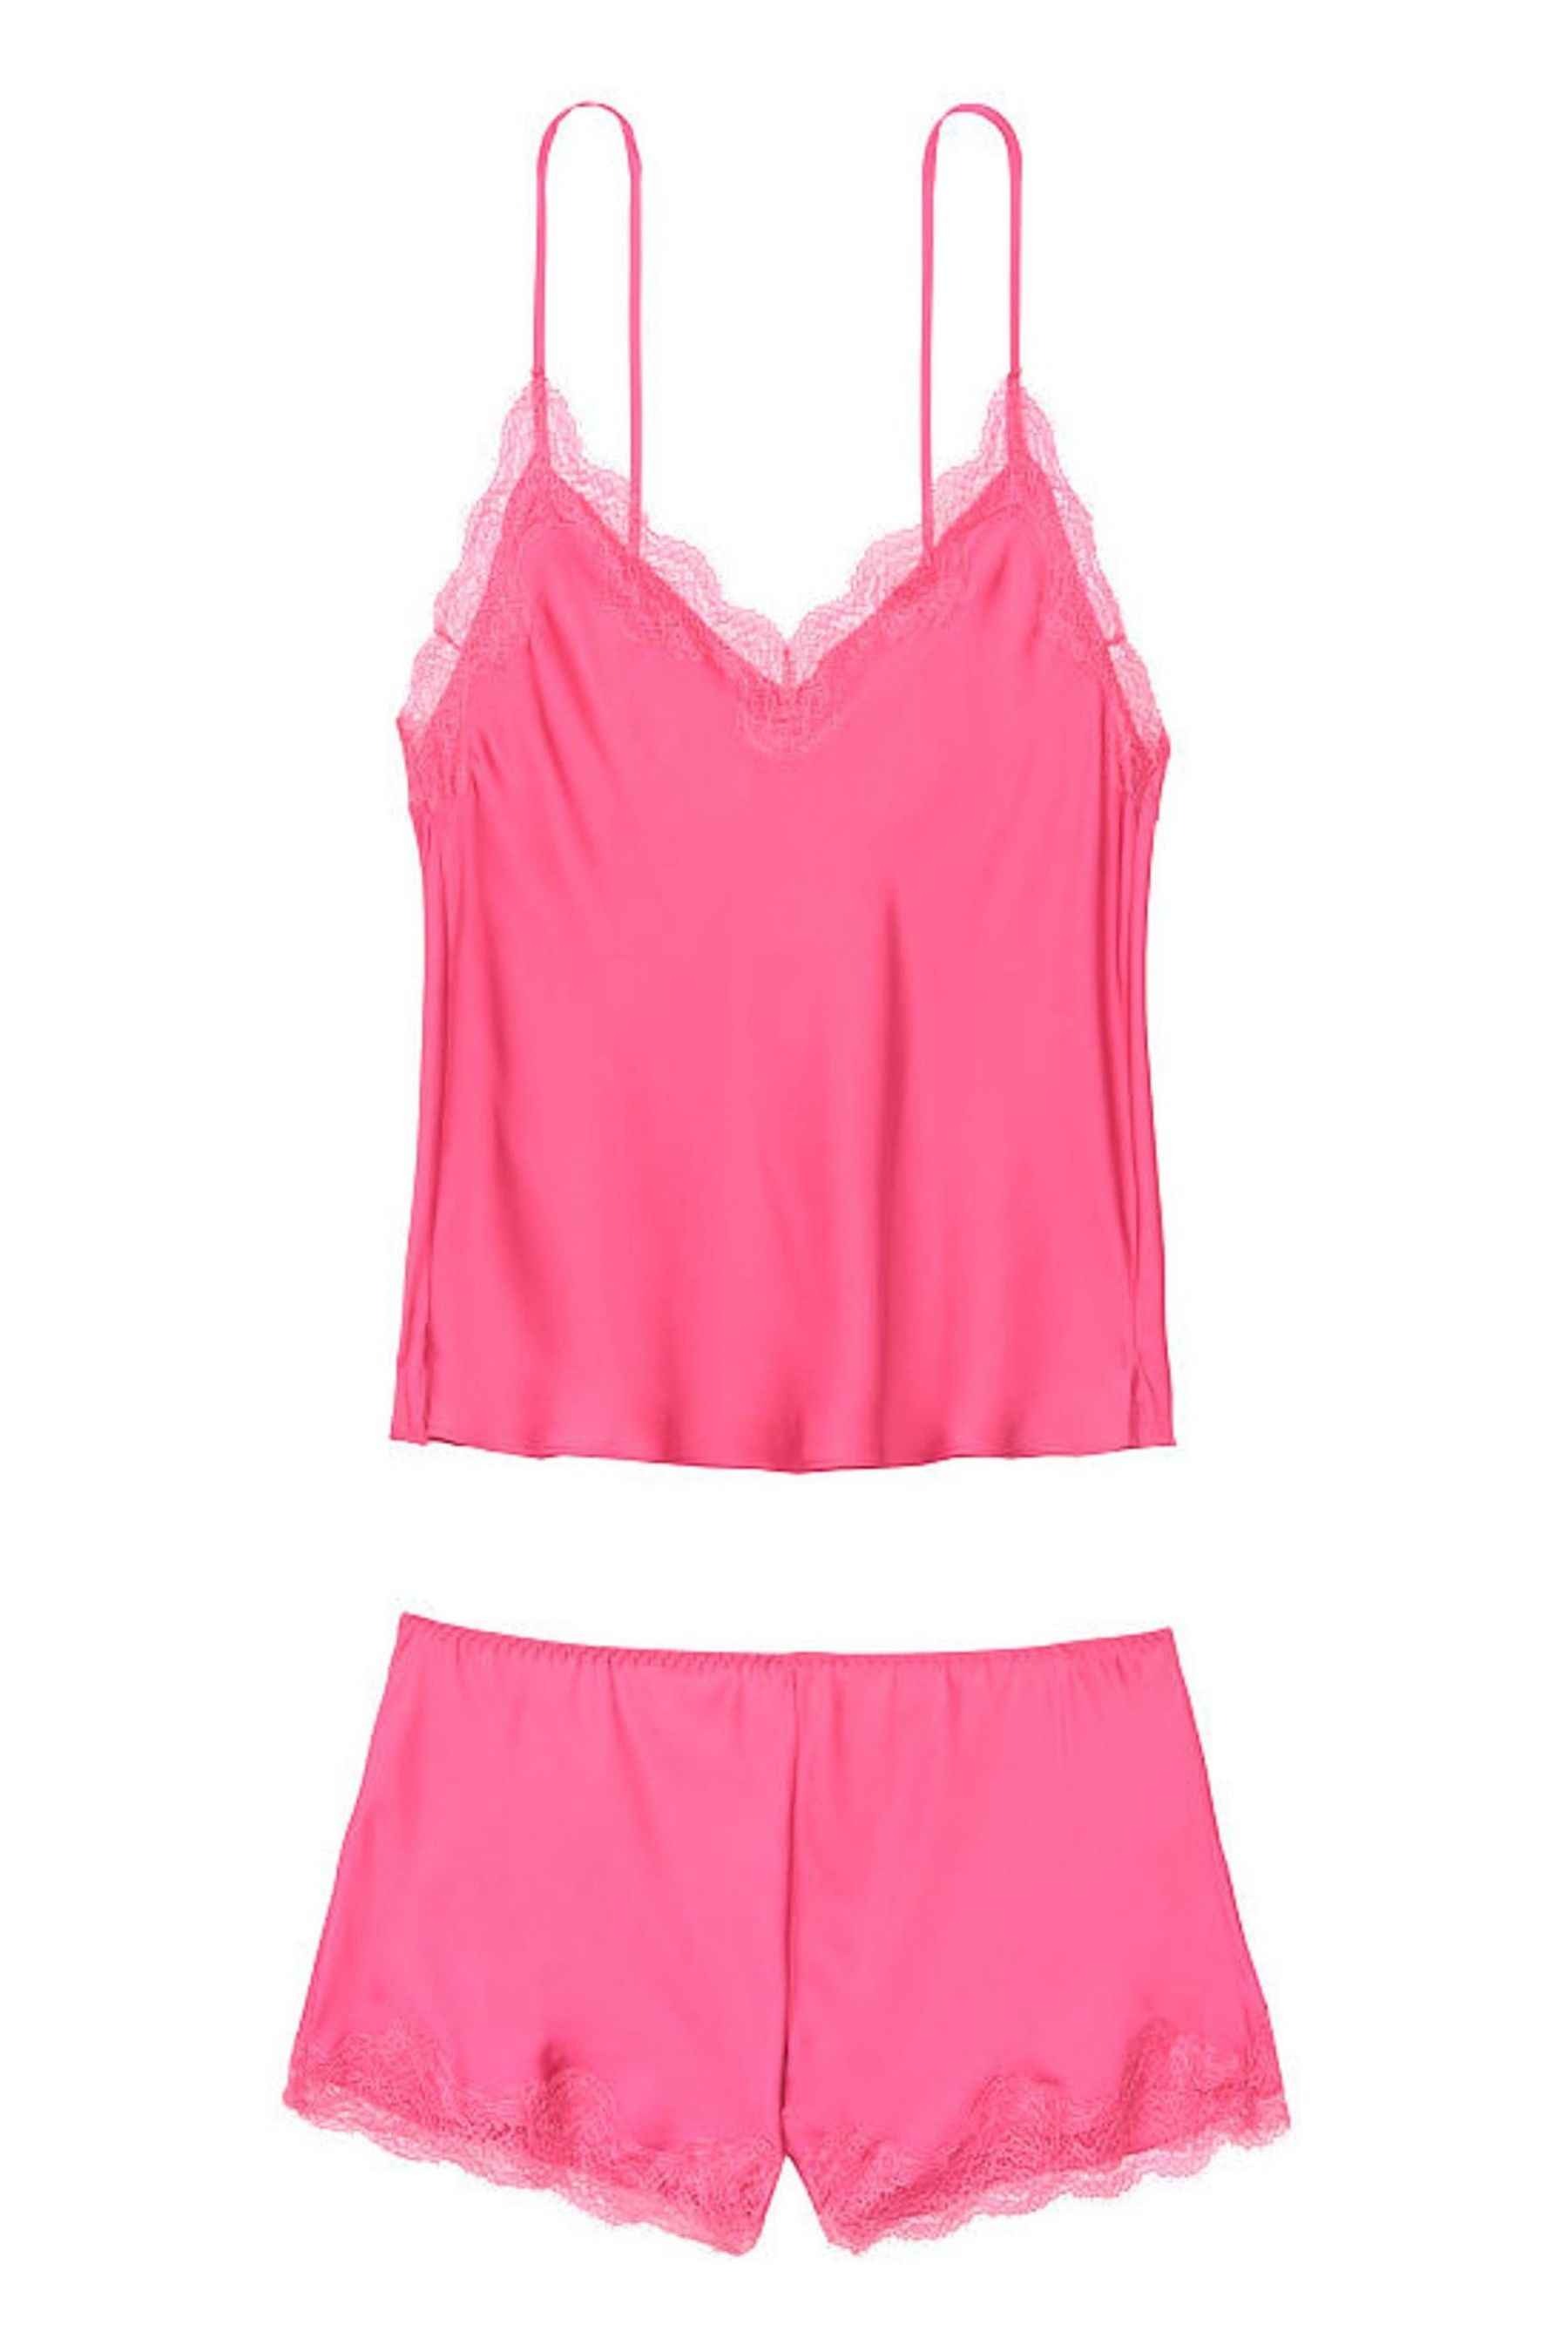 Buy Victoria's Secret Rose Pink Satin Lace Up Back Cami Set from the ...